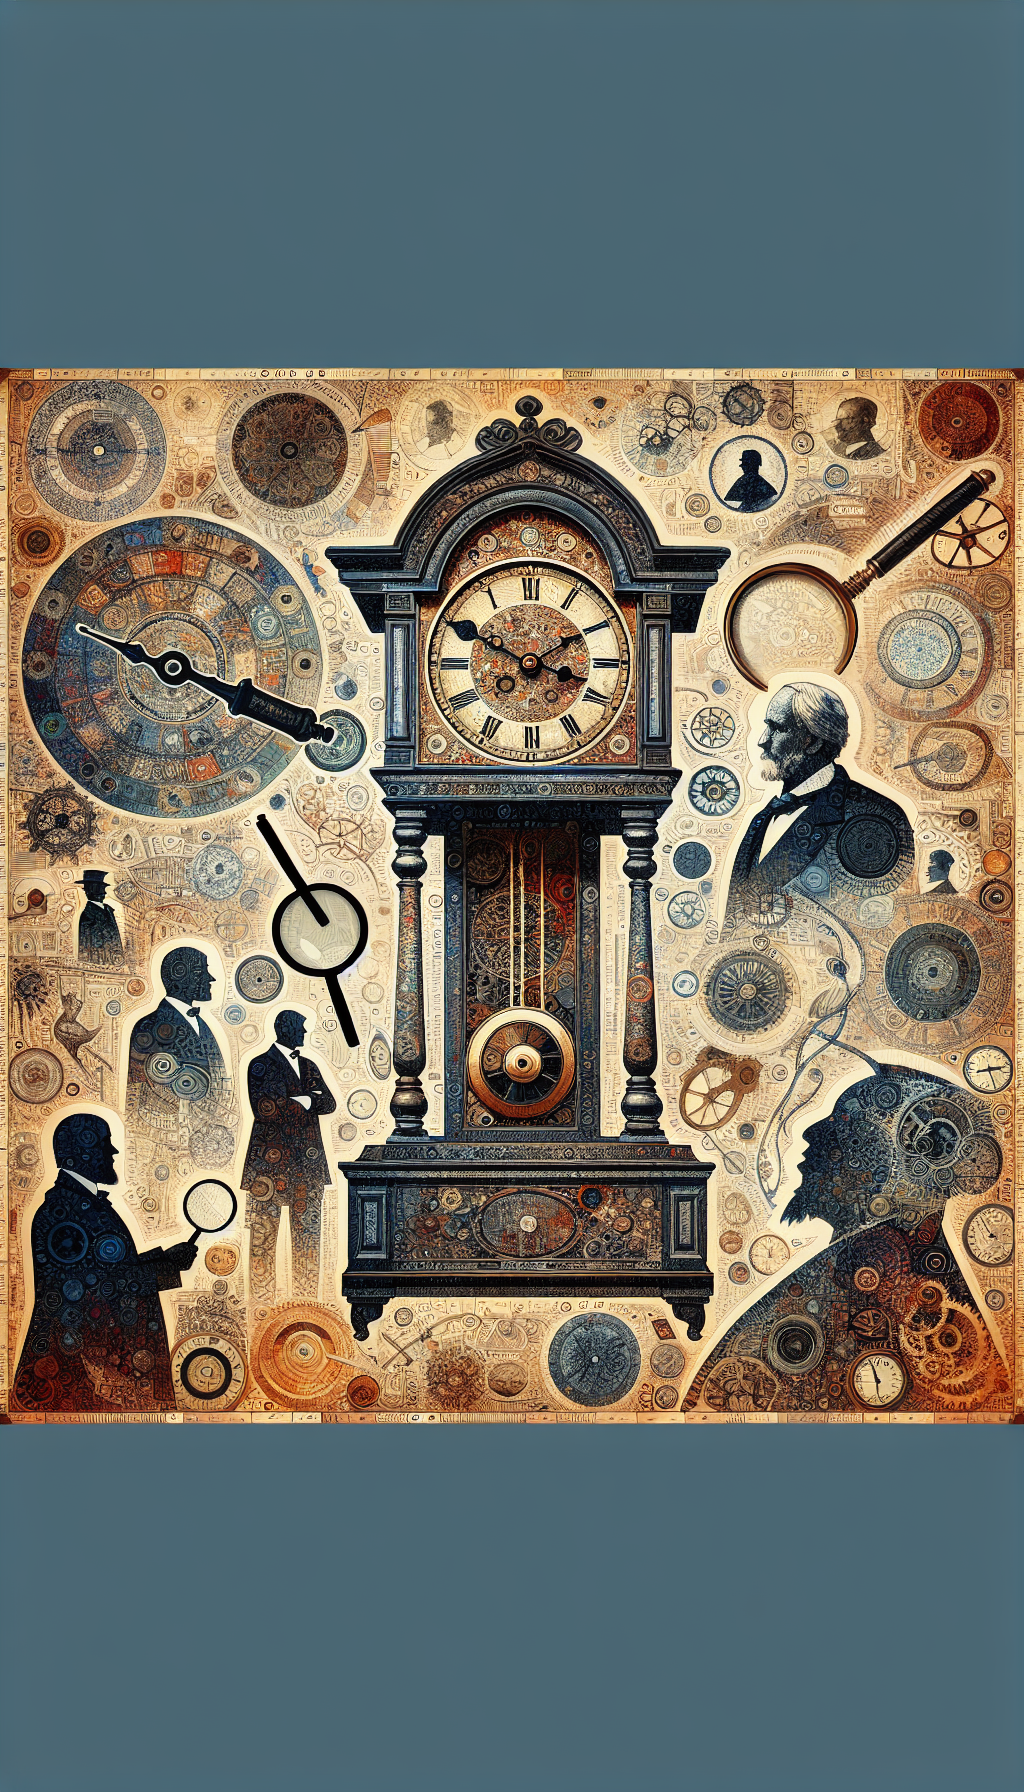 A whimsical collage features an ornate grandfather clock, its pendulum swinging into a tapestry of historical etchings and hallmarks. Among these marks, shadowy figures of clock artisans are partially revealed, reminiscent of their mysterious legacies, as magnifying glasses hover over the scene, signifying the detective work in identifying these age-old signatures. Styles vary from realistic to abstract within this historical mosaic.